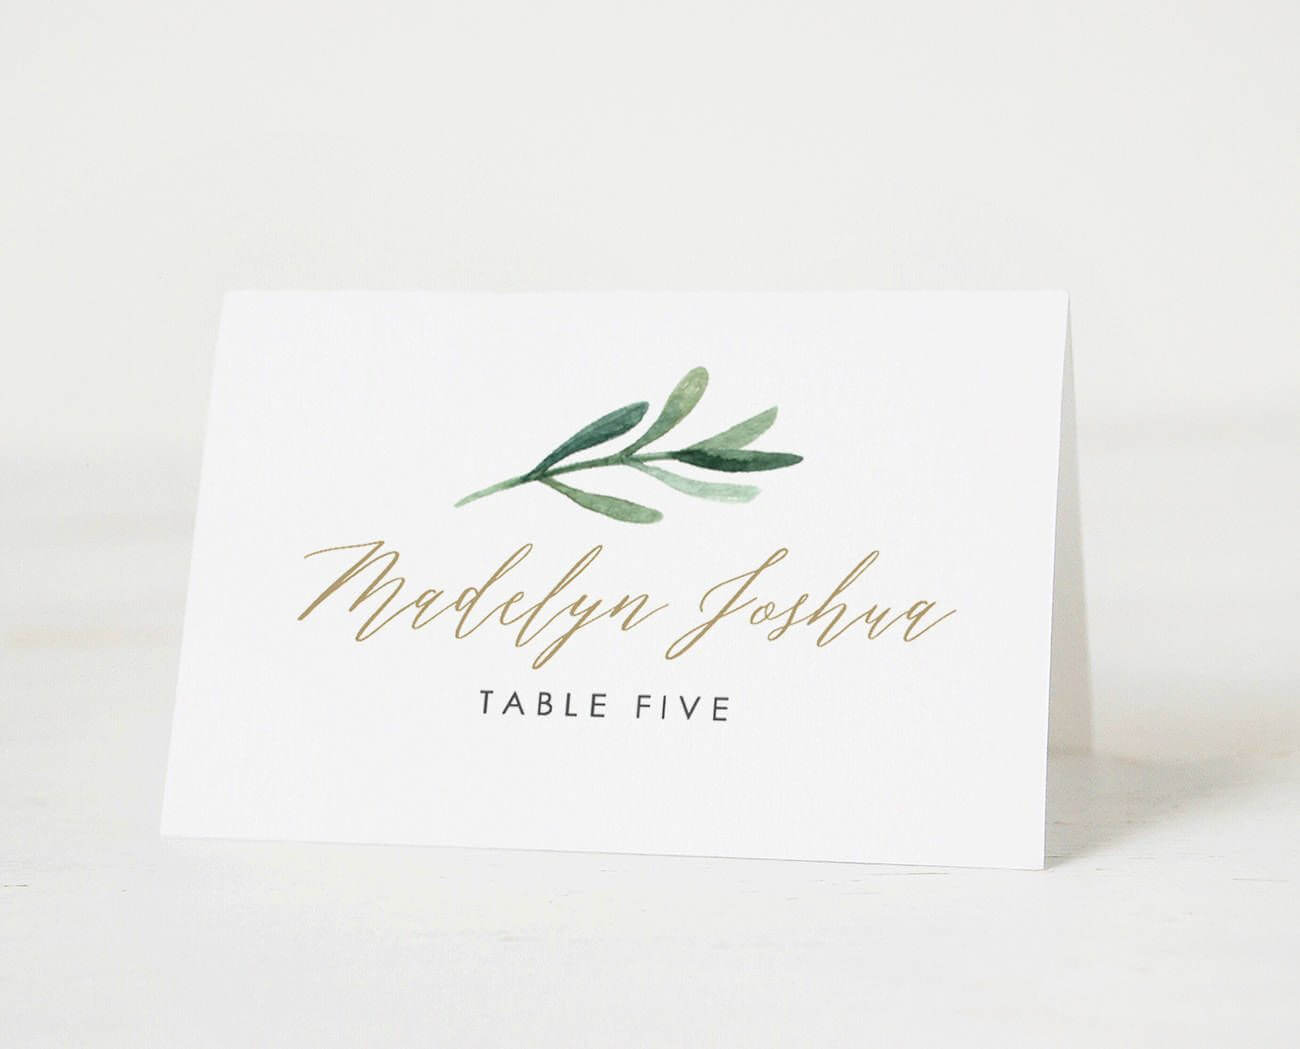 004 Template Ideas Name Place Cards Marvelous Card Free For Place Card Setting Template